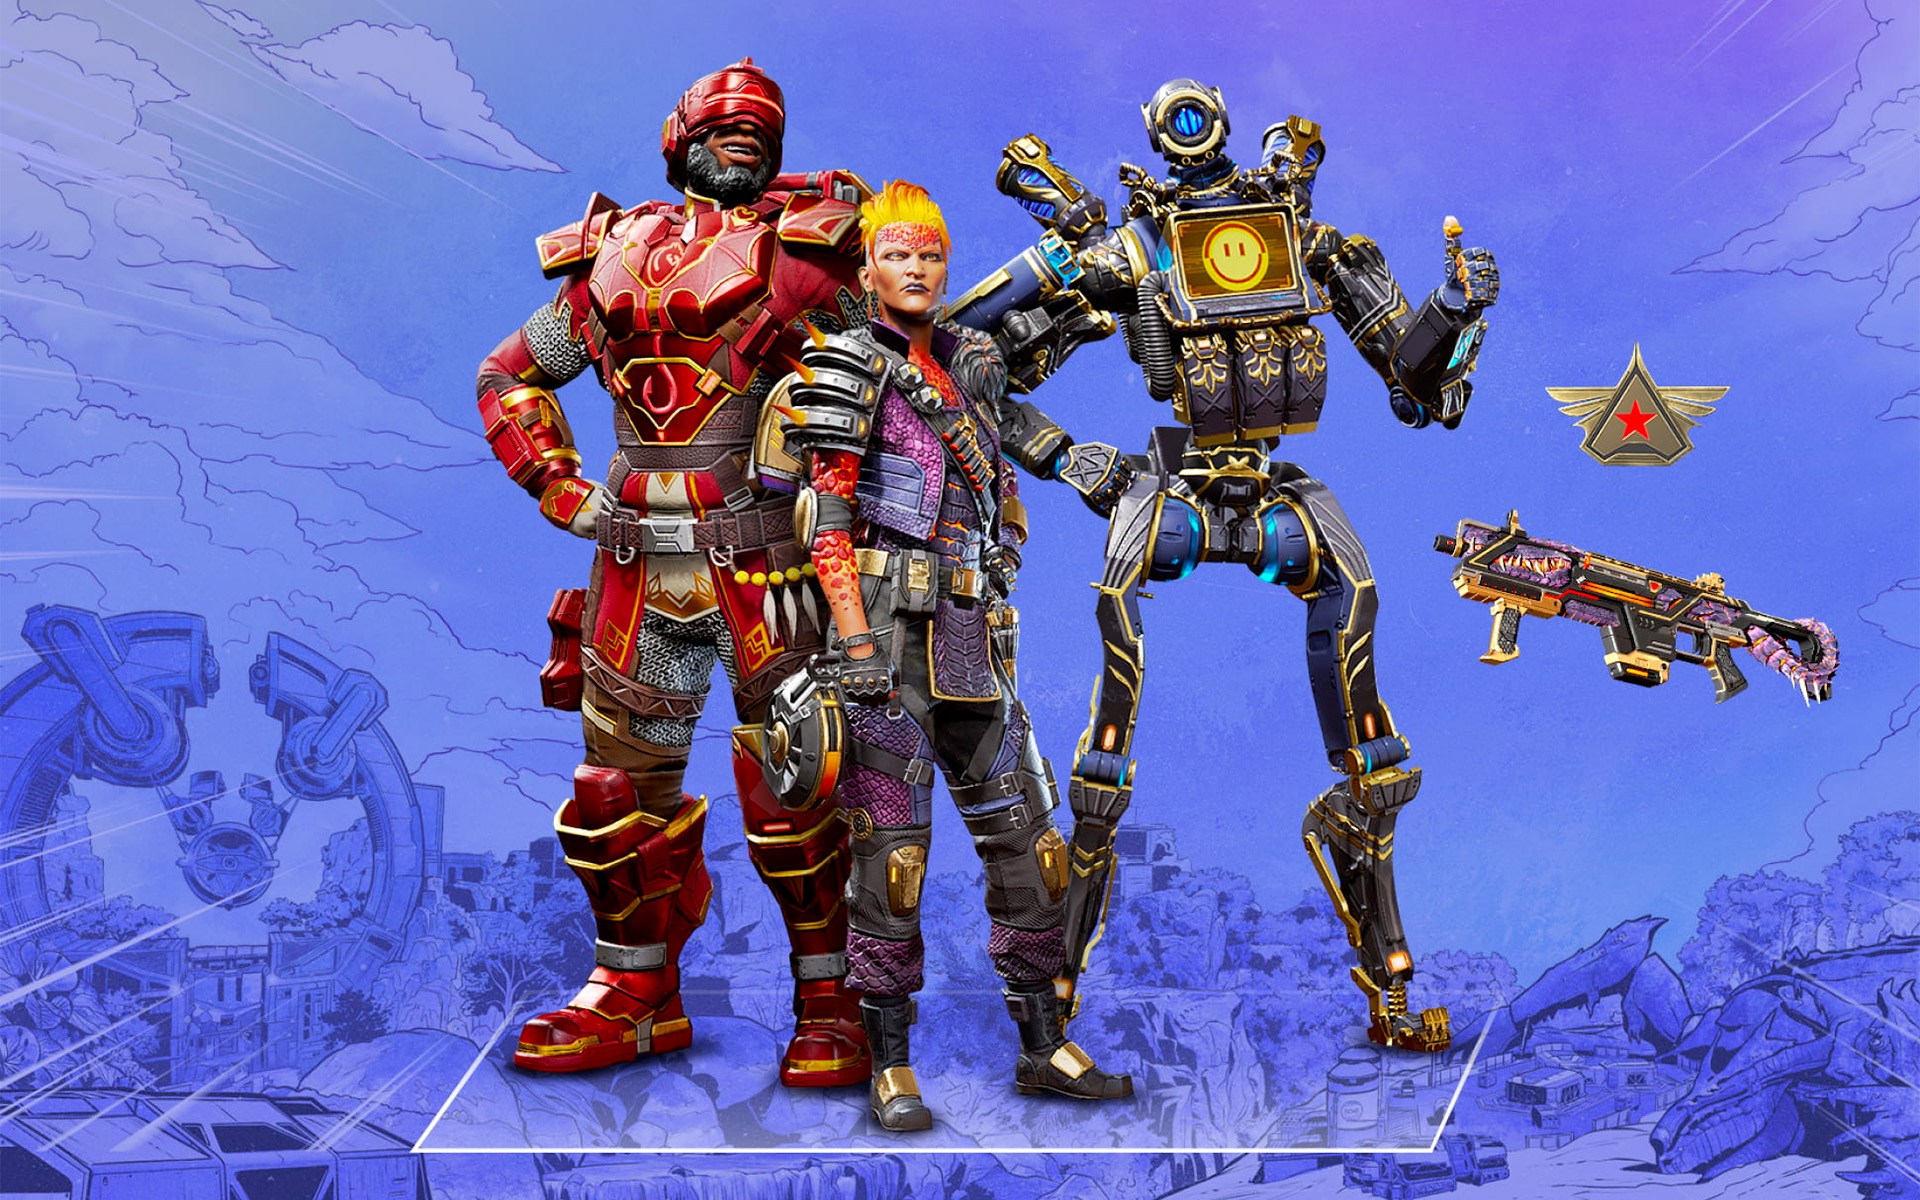 Cosmetics for Newcastle, Mad Maggie, and Pathfinder from Apex Legends season 13